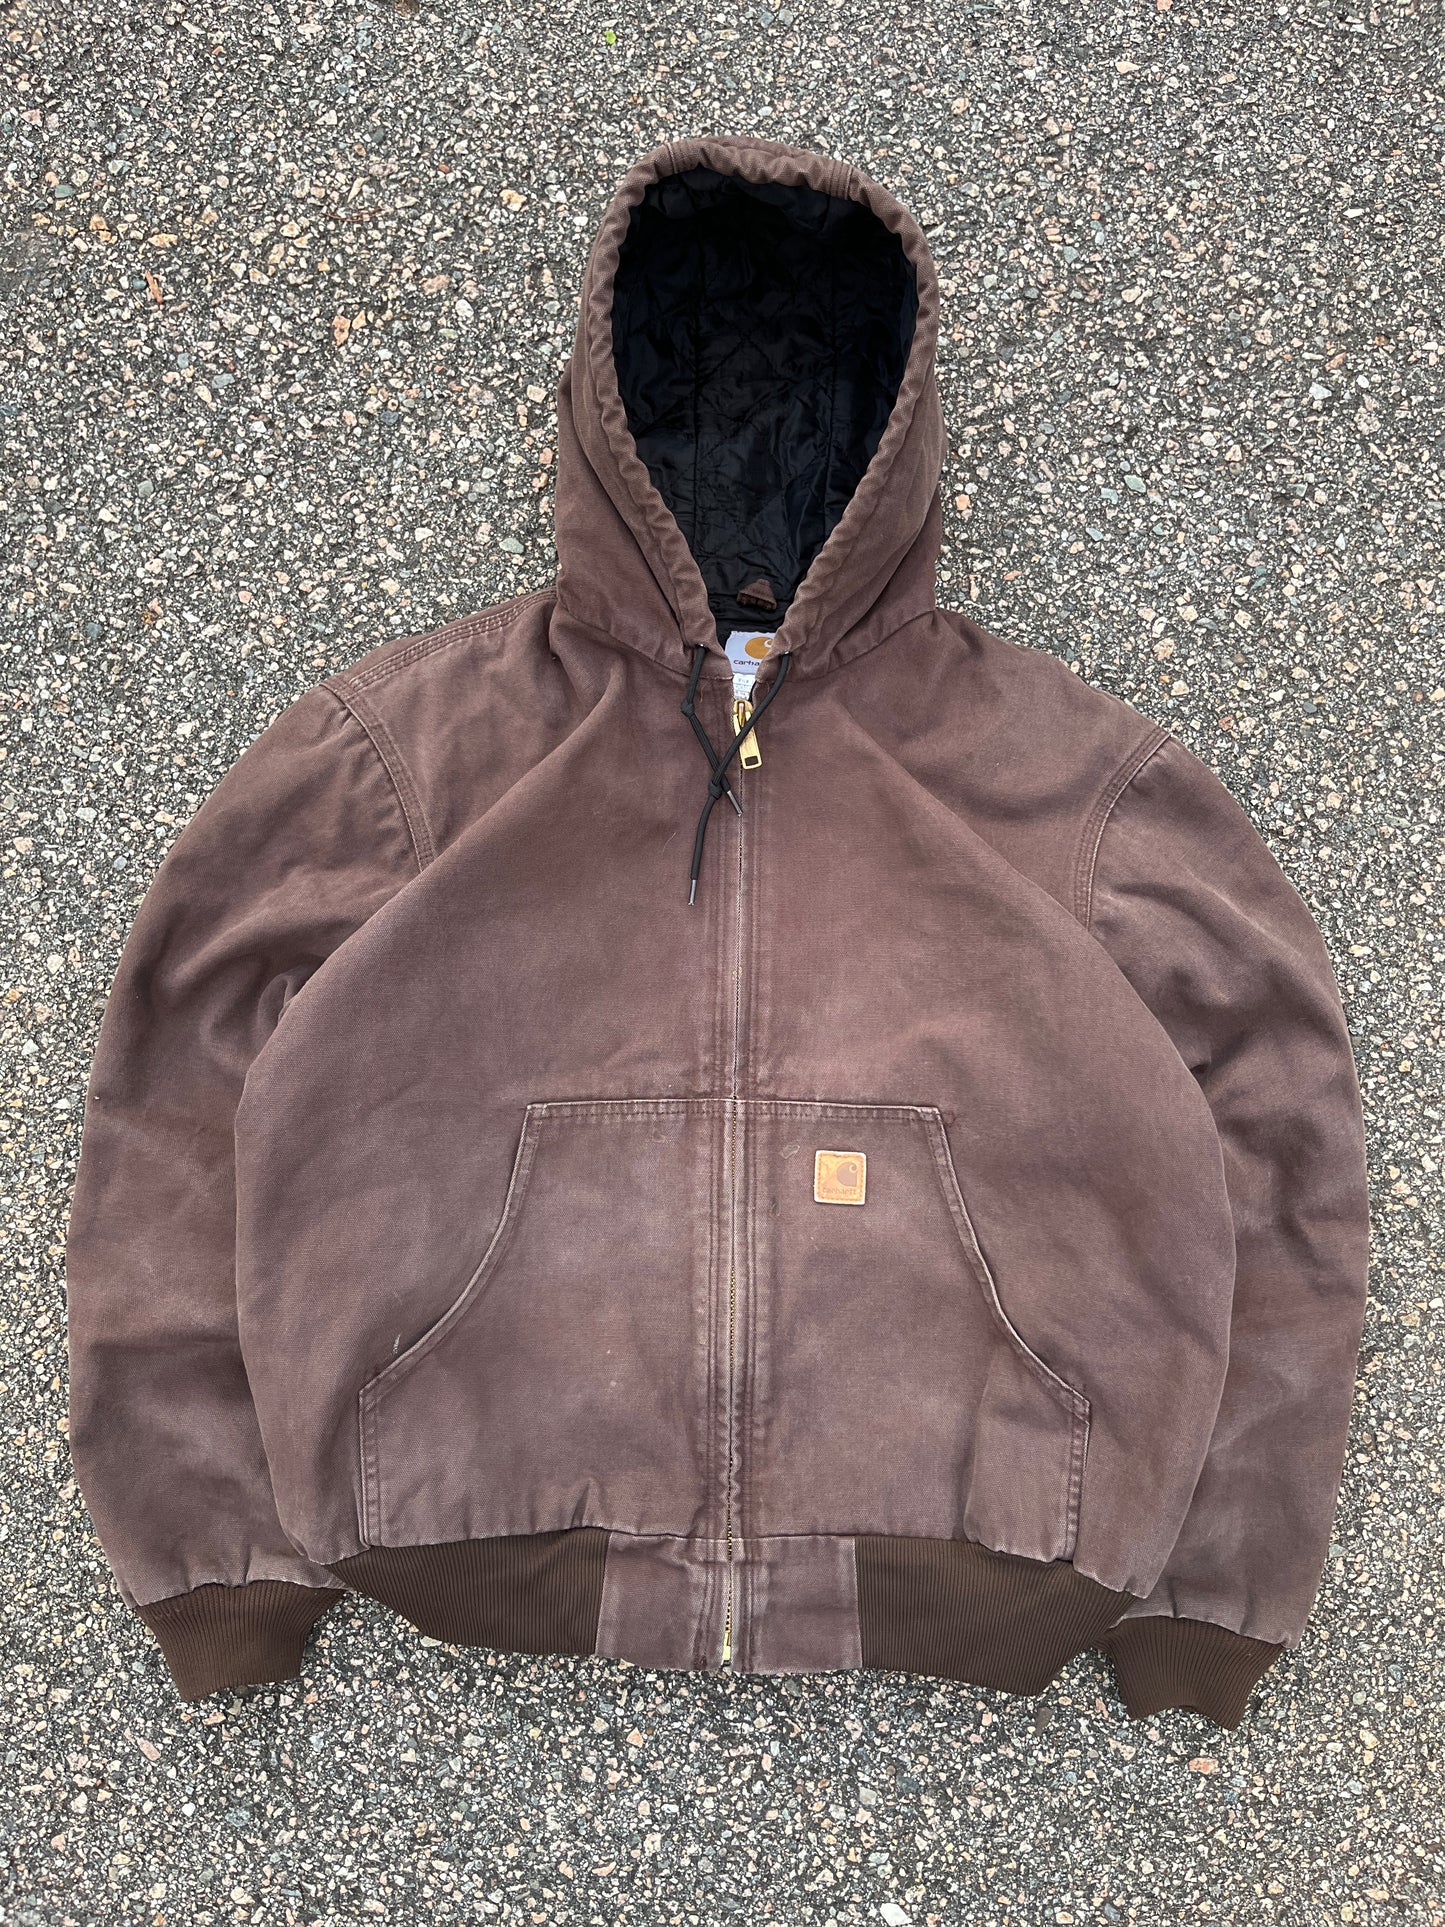 Faded Brown Carhartt Active Jacket - Boxy Large